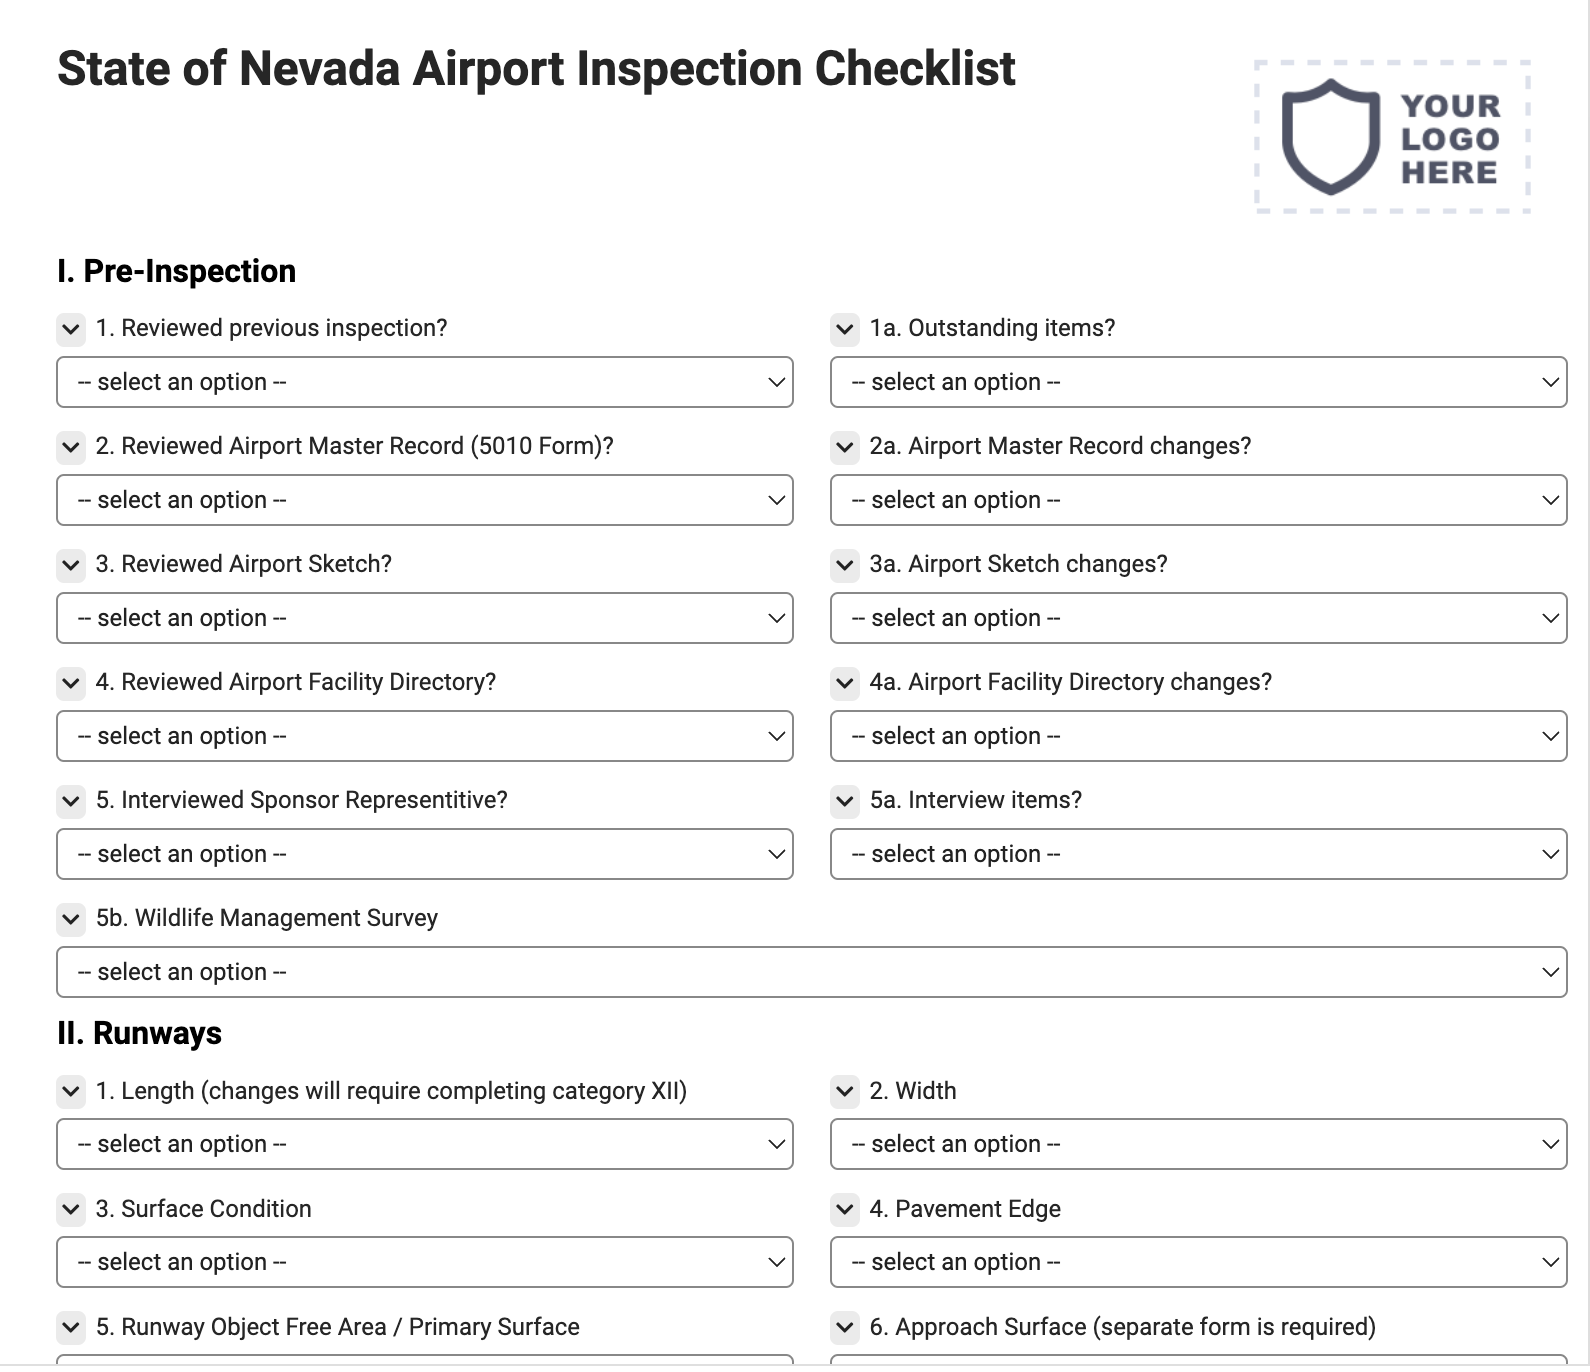 State of Nevada Airport Inspection Checklist